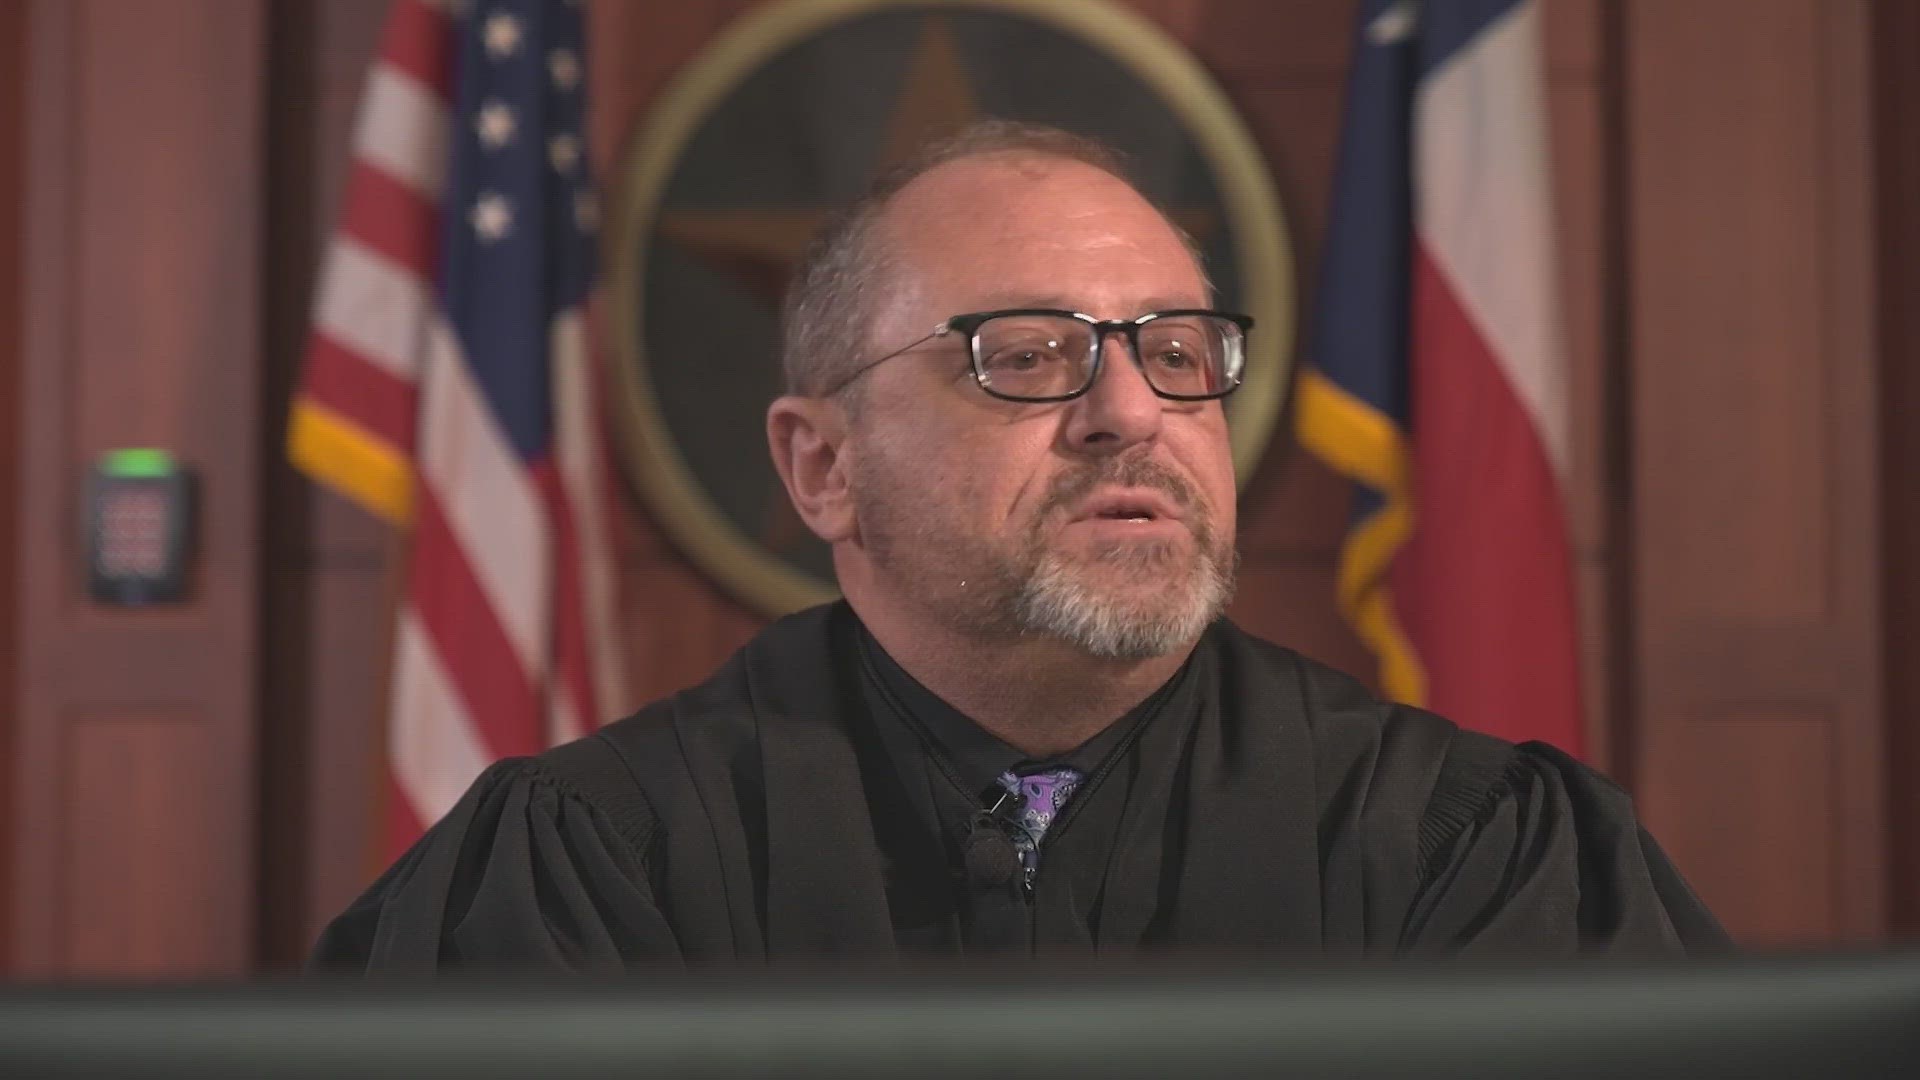 "You buy a pill and get it in a baggie, and you’re rolling the dice with a loaded gun," Steve Burgess, a judge in Denton, Texas, told WFAA.